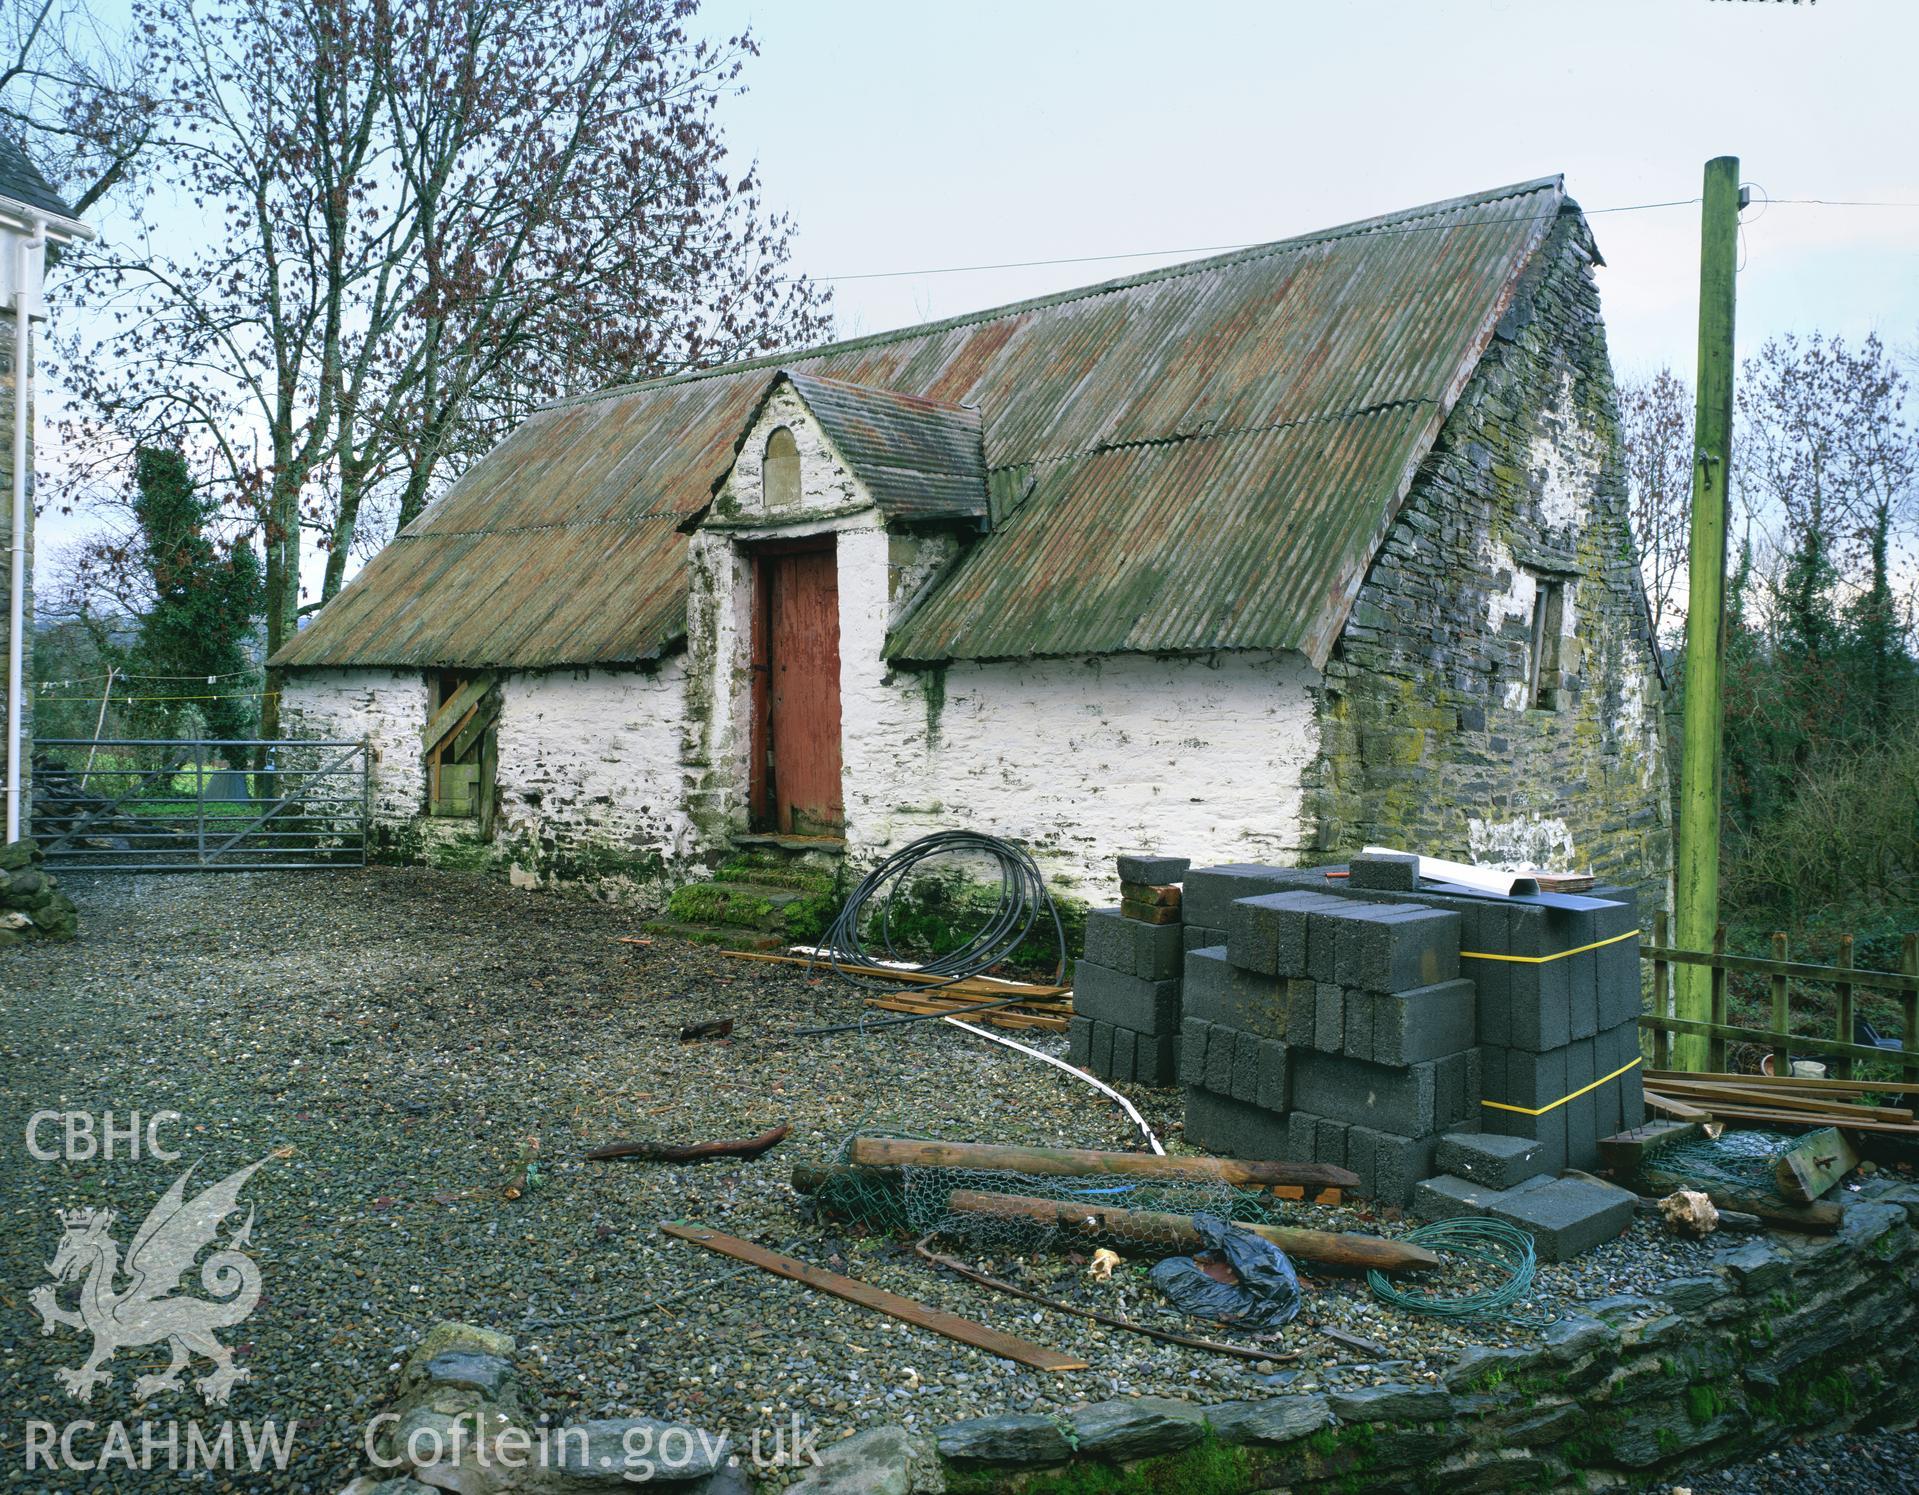 Colour transparency showing an exterior view of the stable at Cwmcoednerth Farmstead, Penbryn, produced by Iain Wright, December 2003